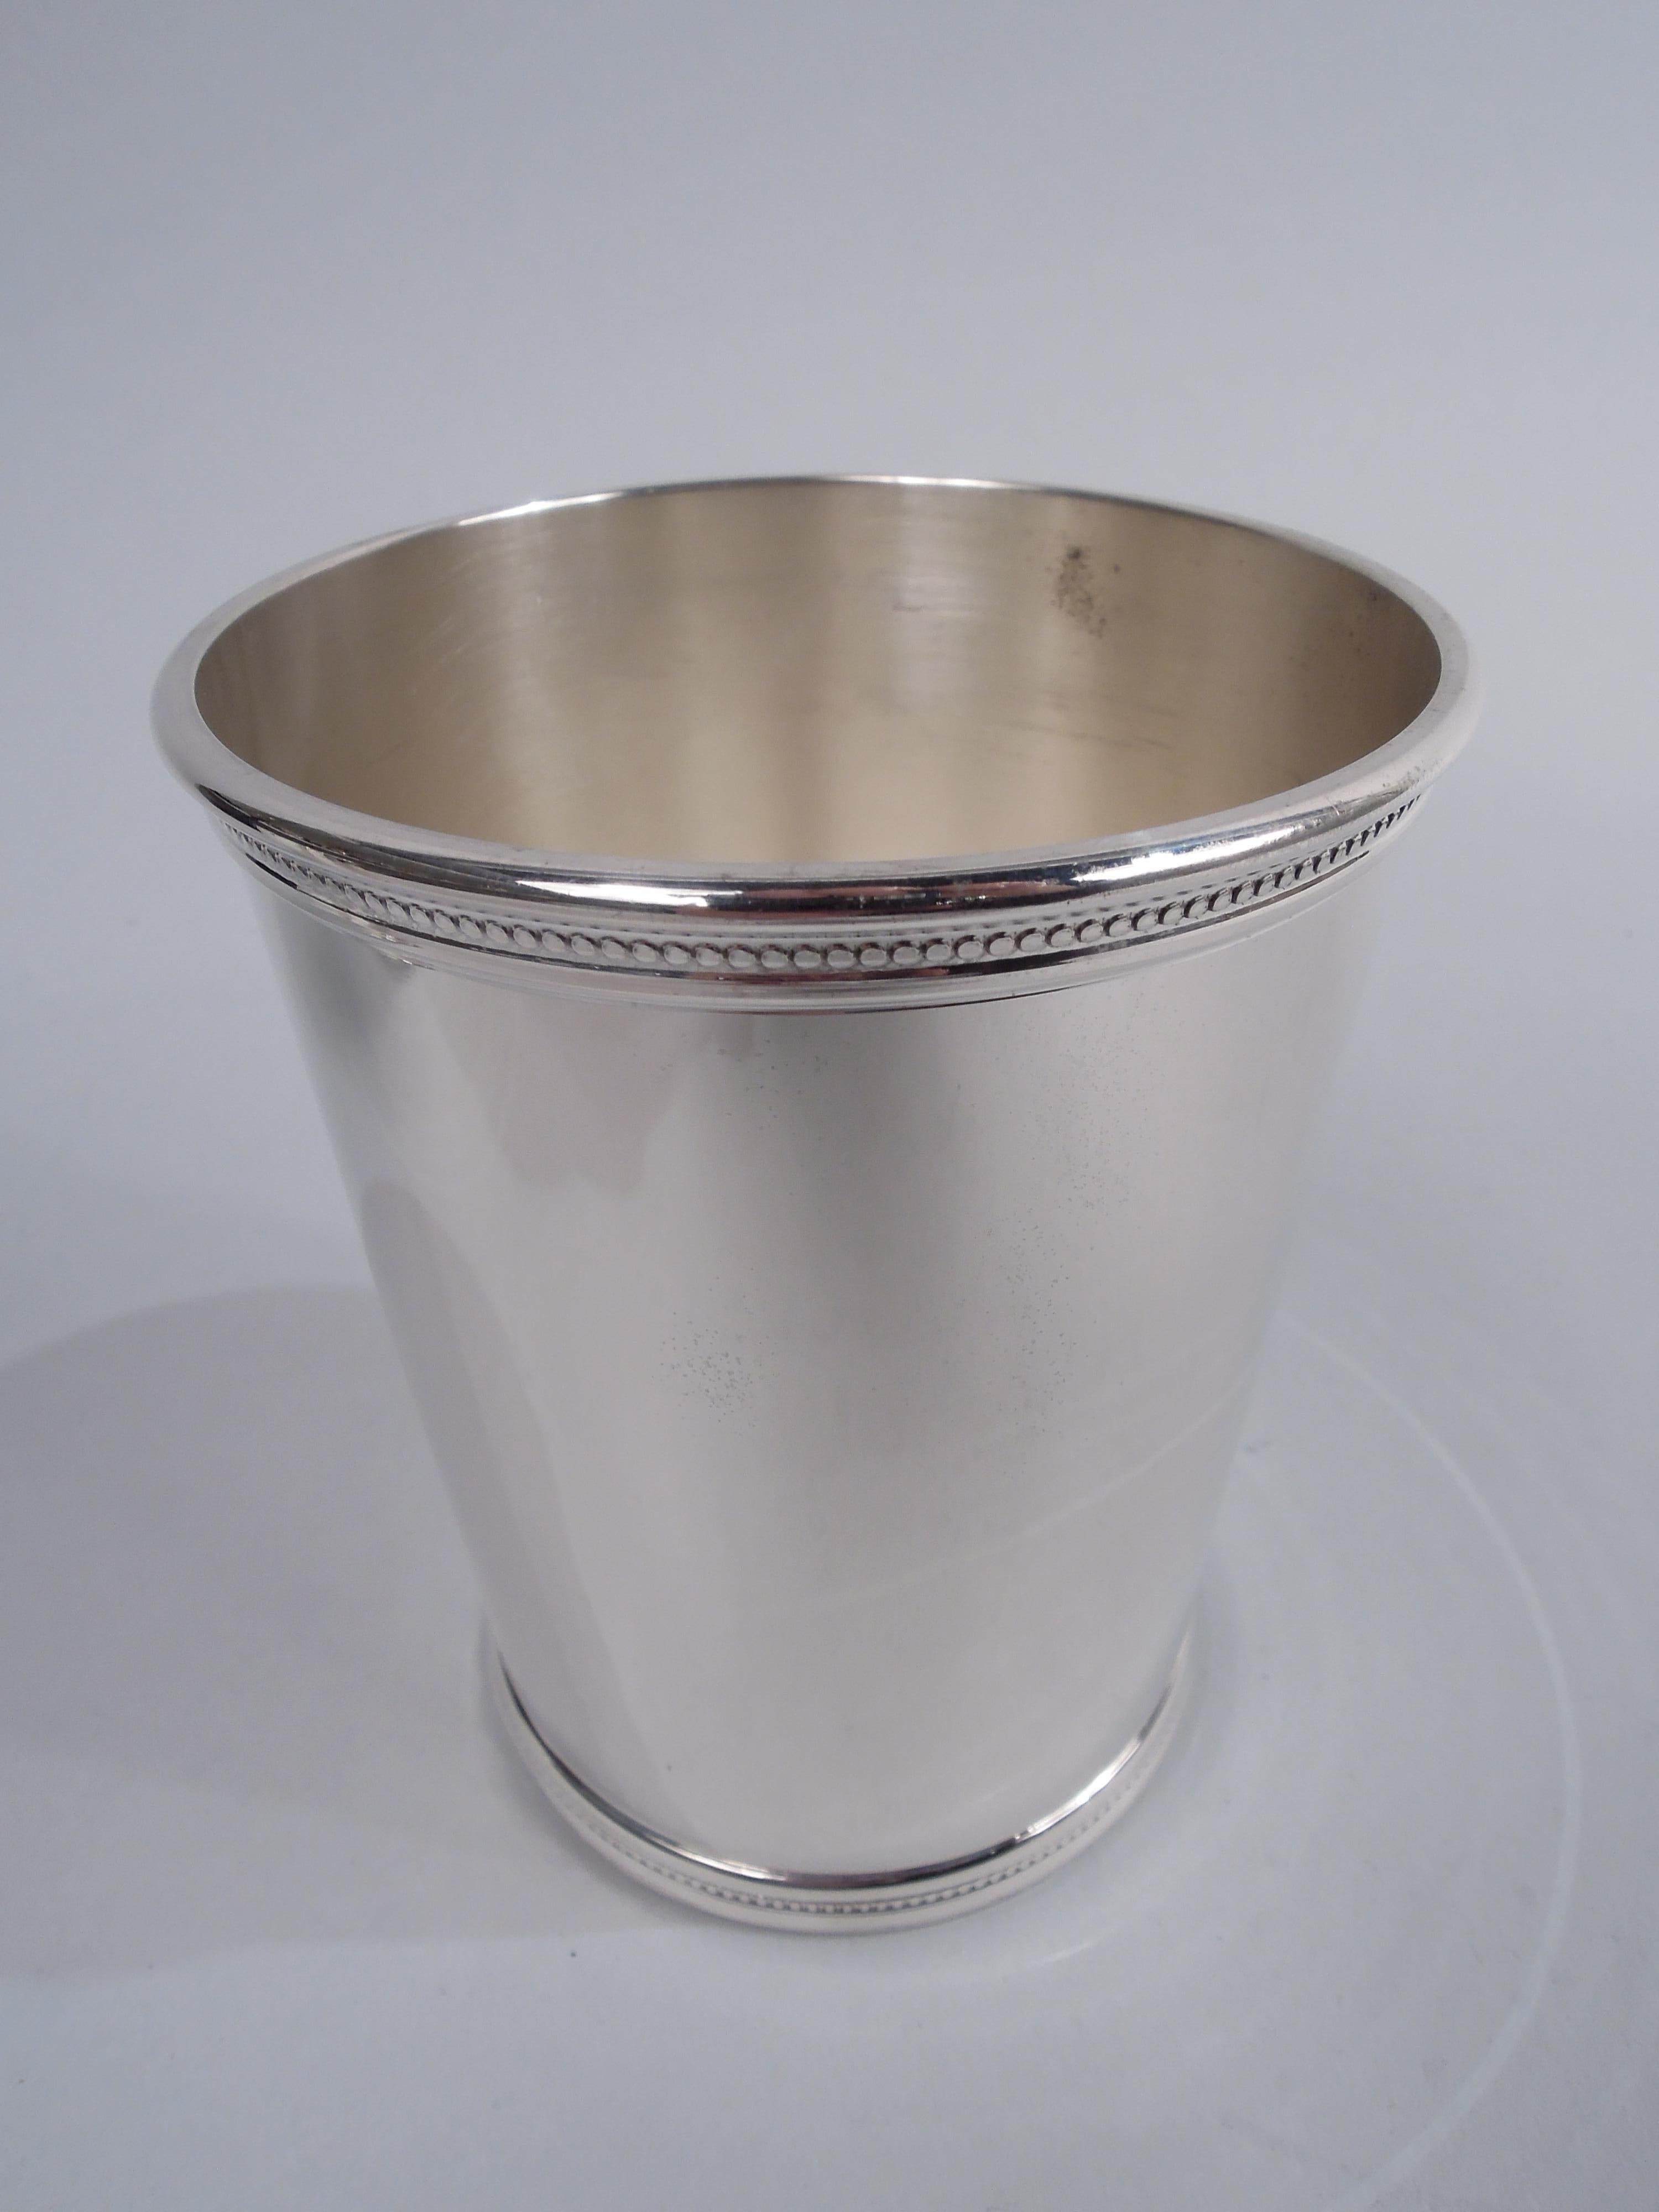 Pair of Eisenhower-era sterling silver mint juleps. Made by Scearce in Shelbyville, Kentucky. Straight and tapering sides, and beaded and molded rim and foot. A great way in these tumultuous times to get back in touch with your inner country club